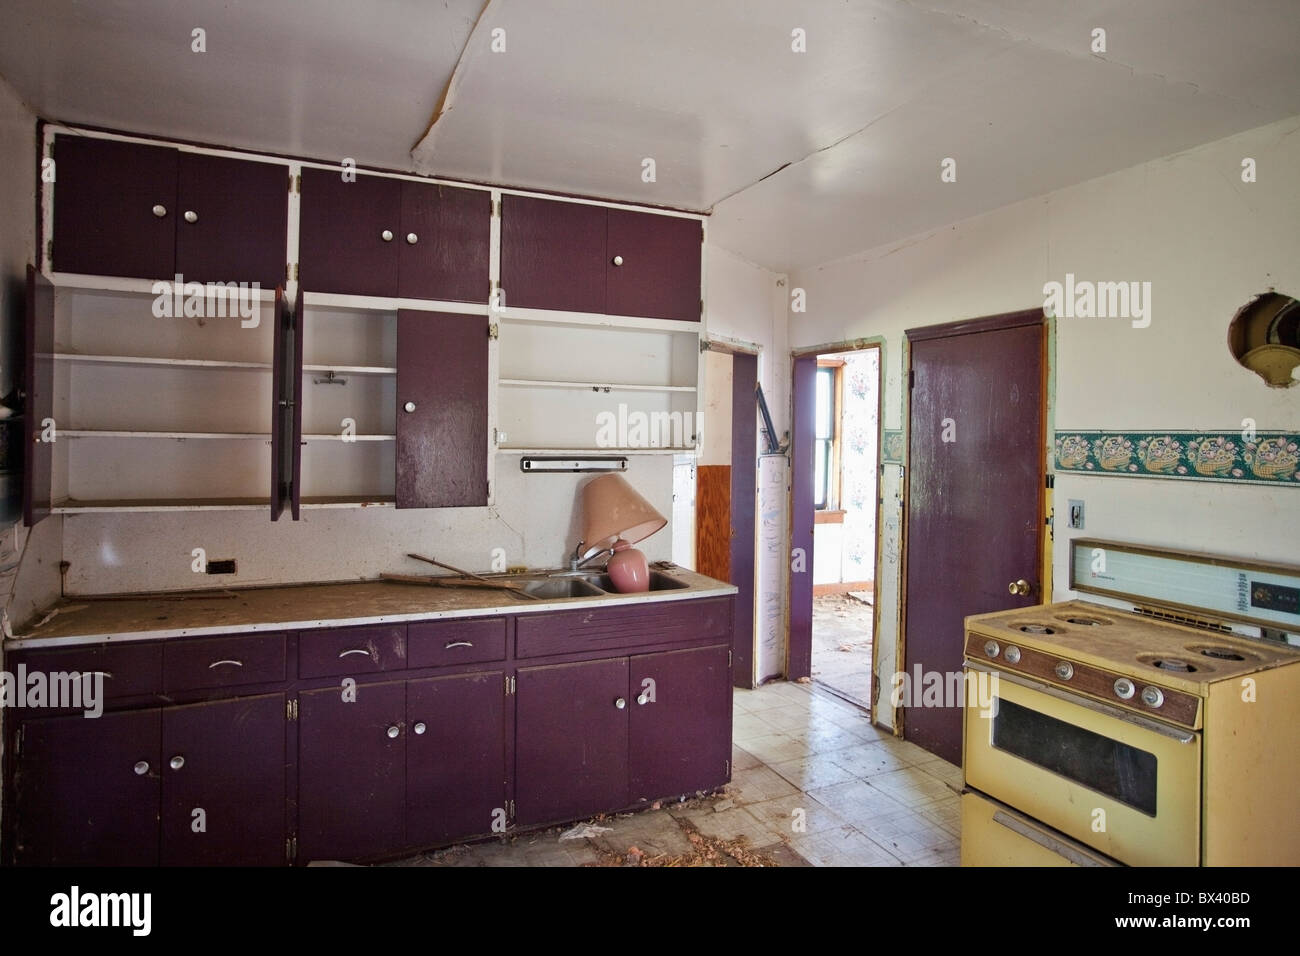 An Old Kitchen In Need Of Renovations Stock Photo